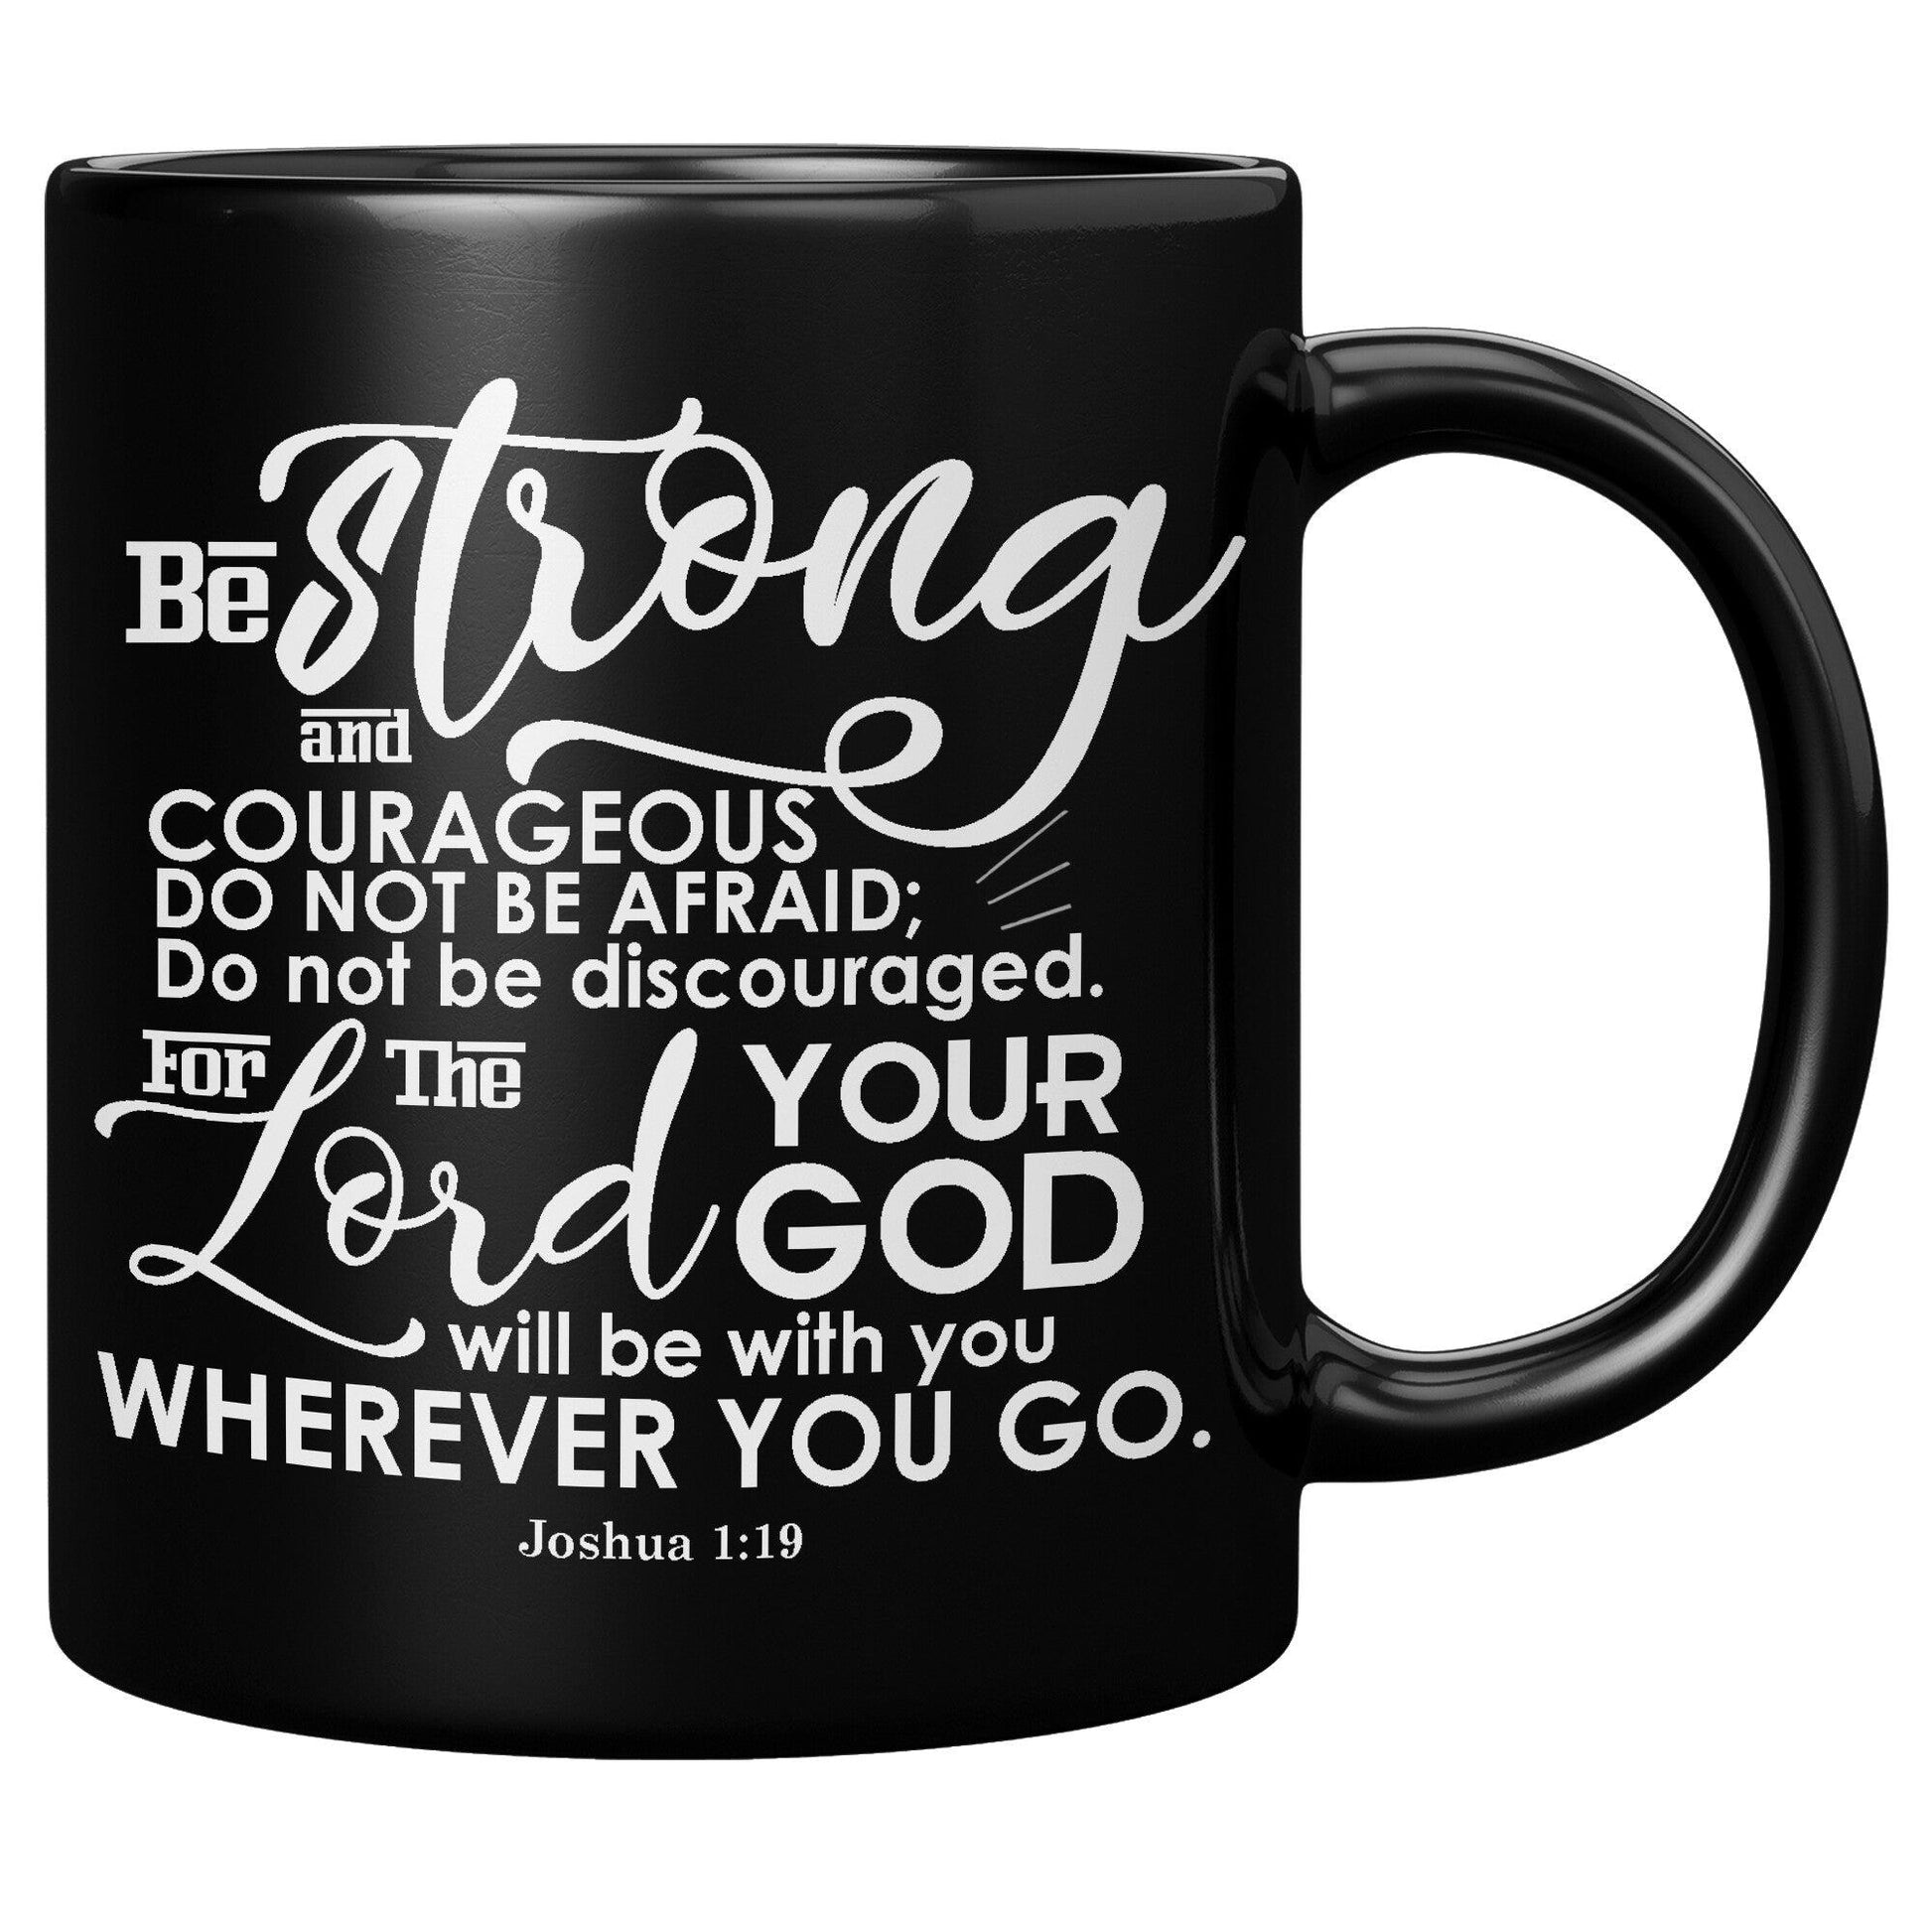 https://thegivenget.com/cdn/shop/products/be-strong-and-courageous-do-not-be-afraid-do-not-be-discouraged-for-the-lord-your-god-will-be-with-you-wherever-you-go-joshua-1-9-coffee-mug-gift-black-mug-thegivenget-3.jpg?v=1697761376&width=1946